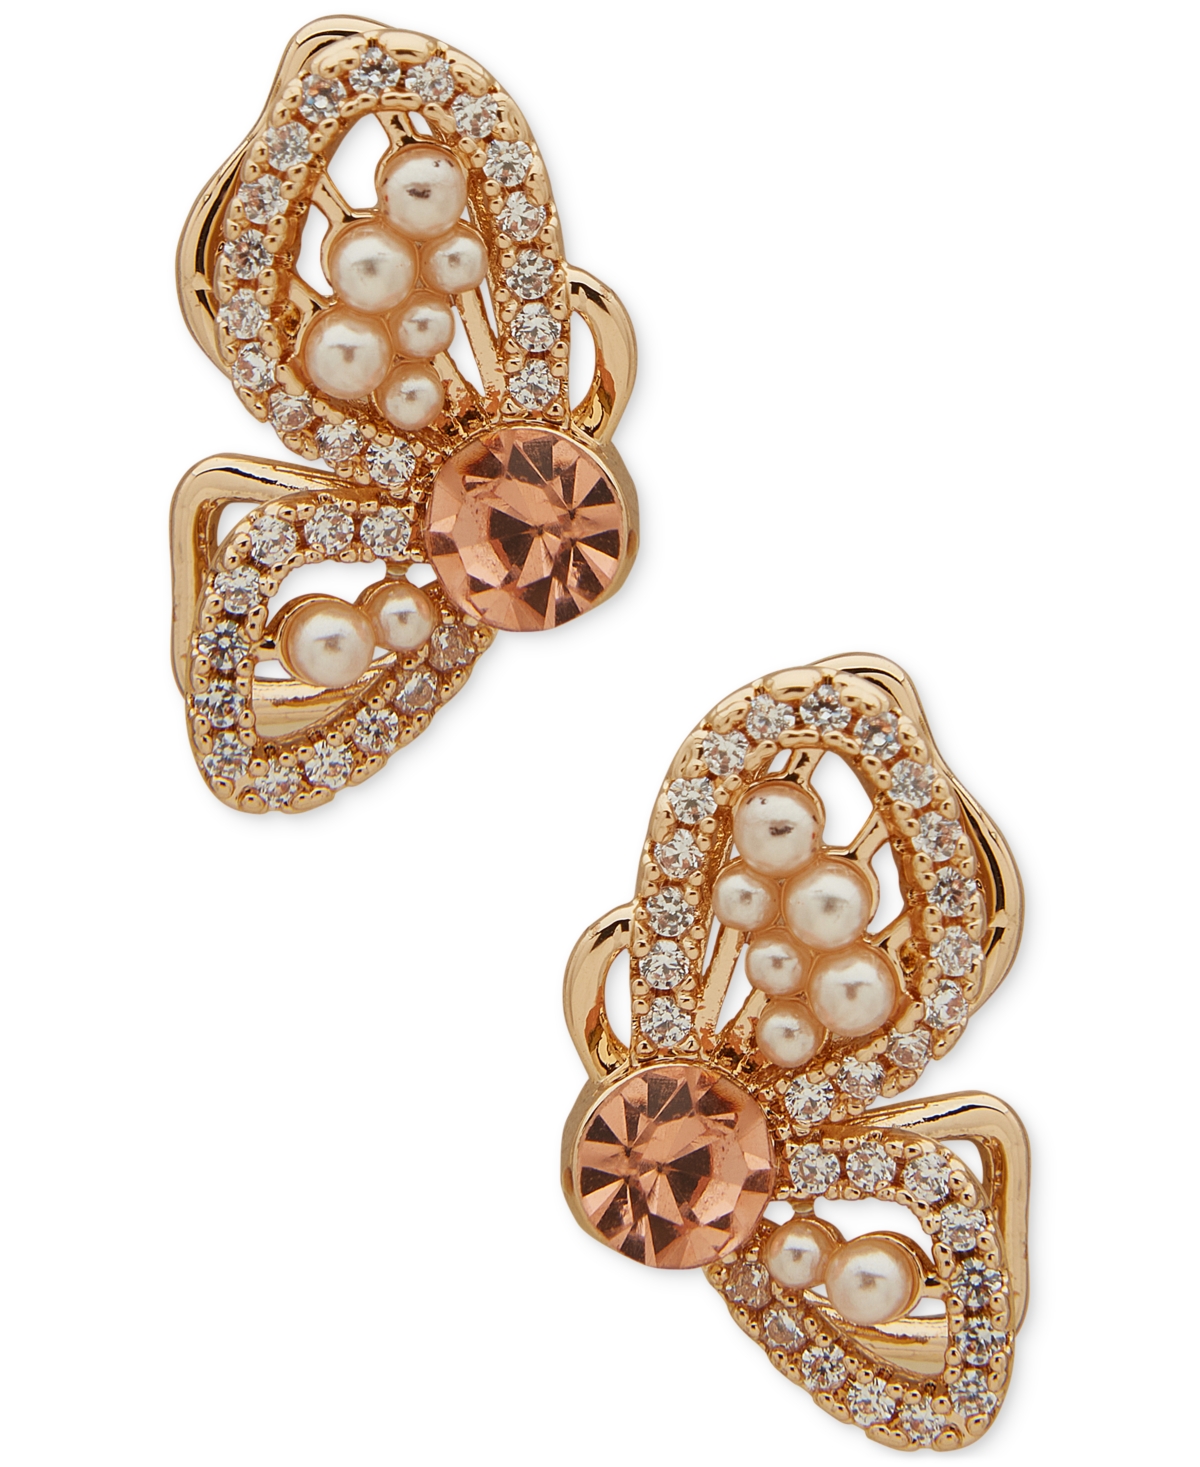 Gold-Tone Crystal & Imitation Pearl Butterfly Stud Earrings - Blush